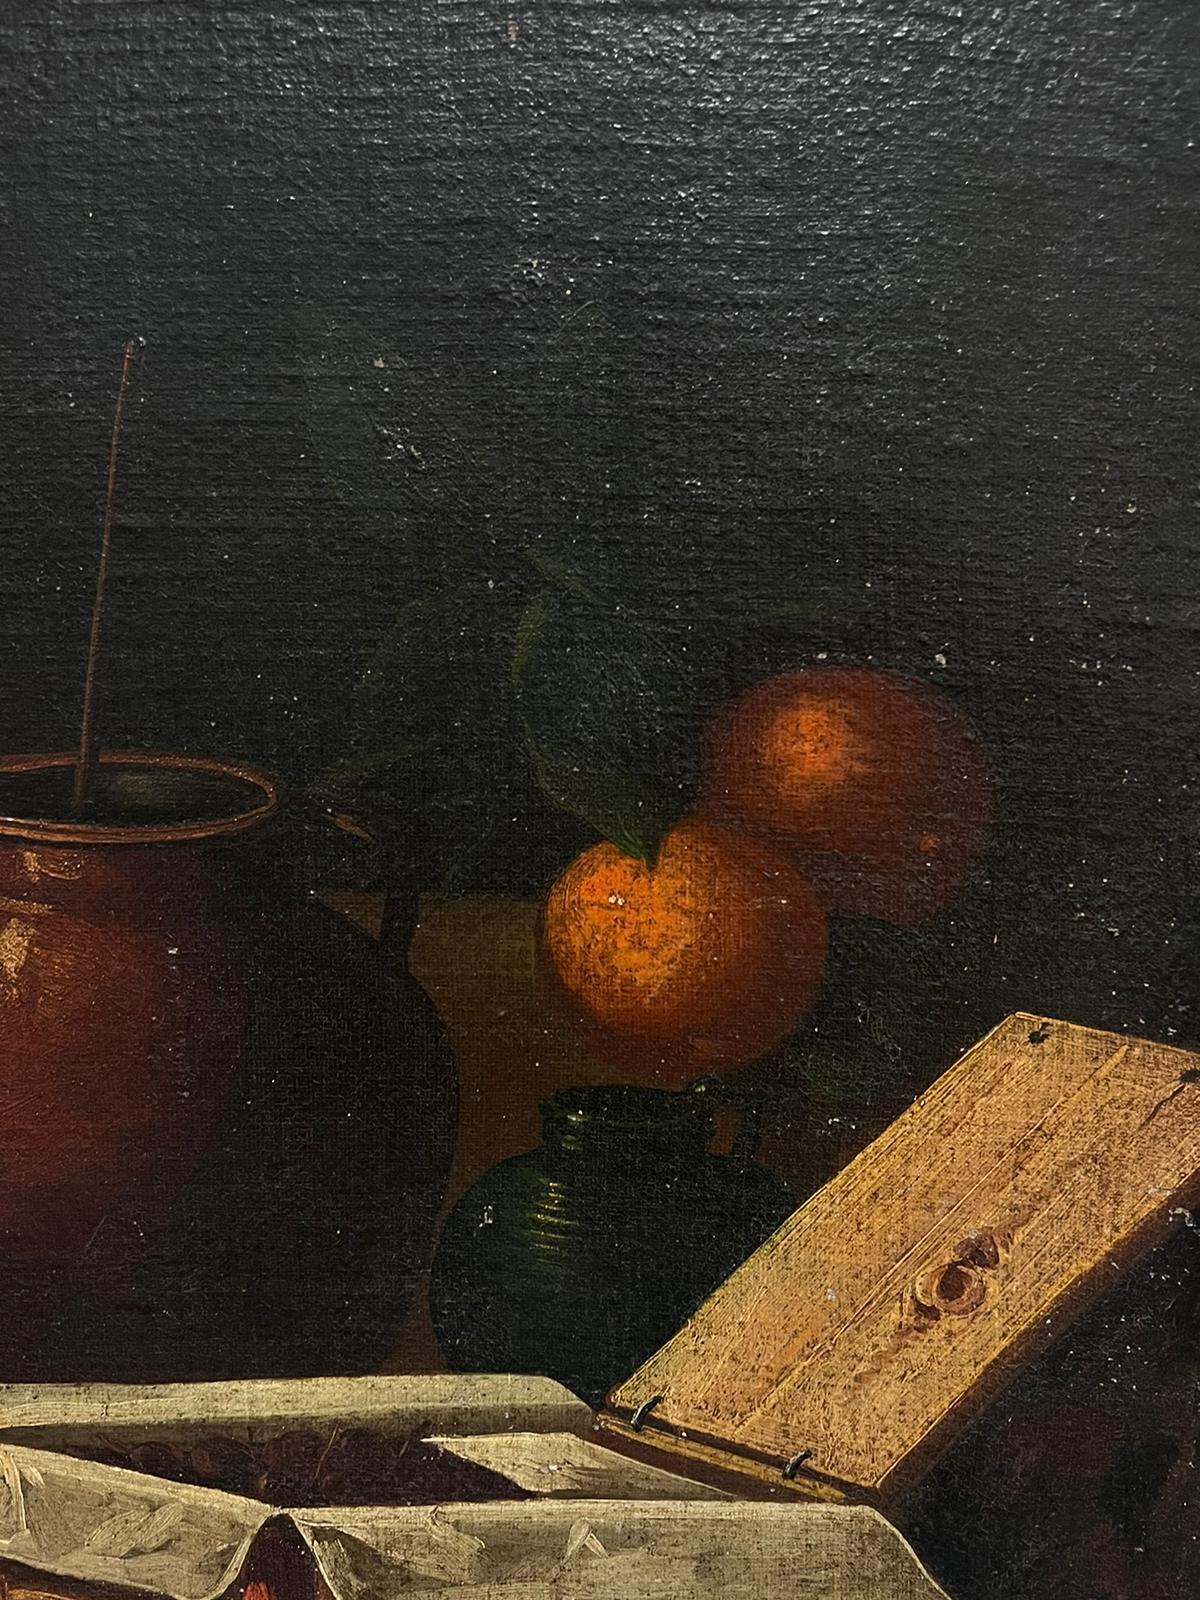 Classical Still Life of Fruit in Basket with other objects
Italian artist, 18th century
oil on canvas, unframed
canvas: 24.5 x 33 inches
provenance: private collection, UK
condition: some minor surface scuffs and scratches but overall good and sound